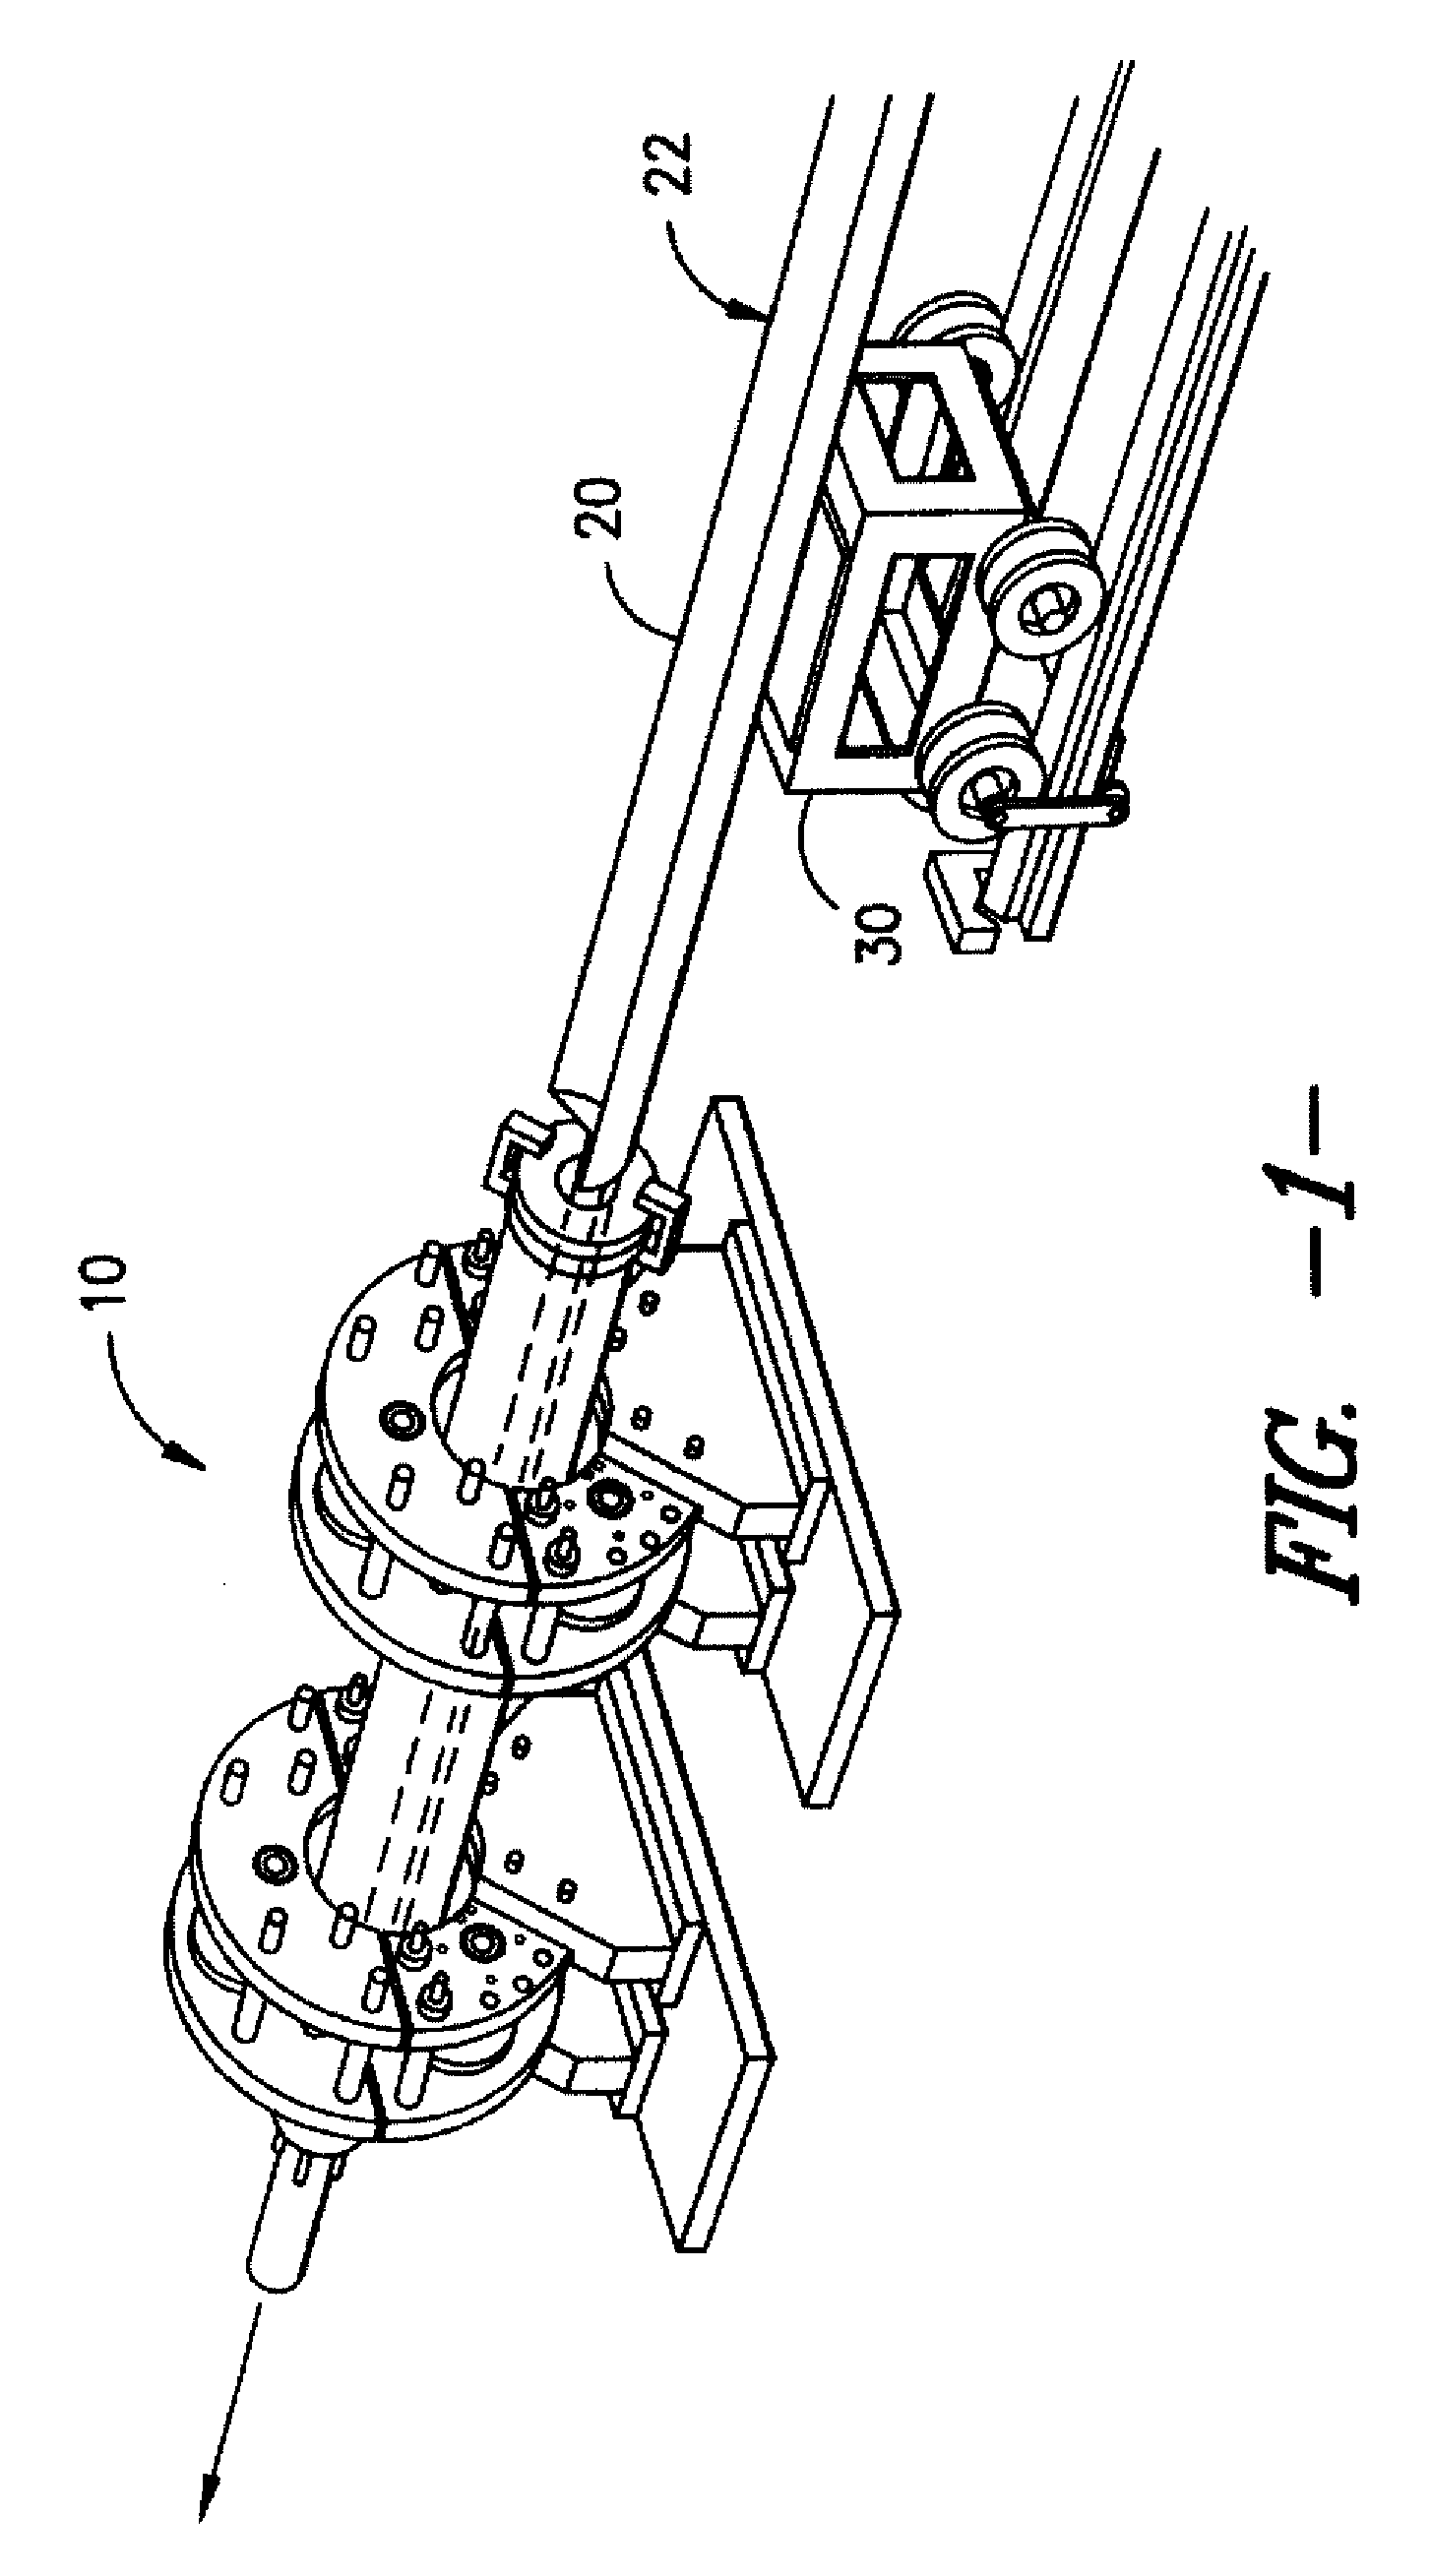 Method of making precursor hollow castings for tube manufacture